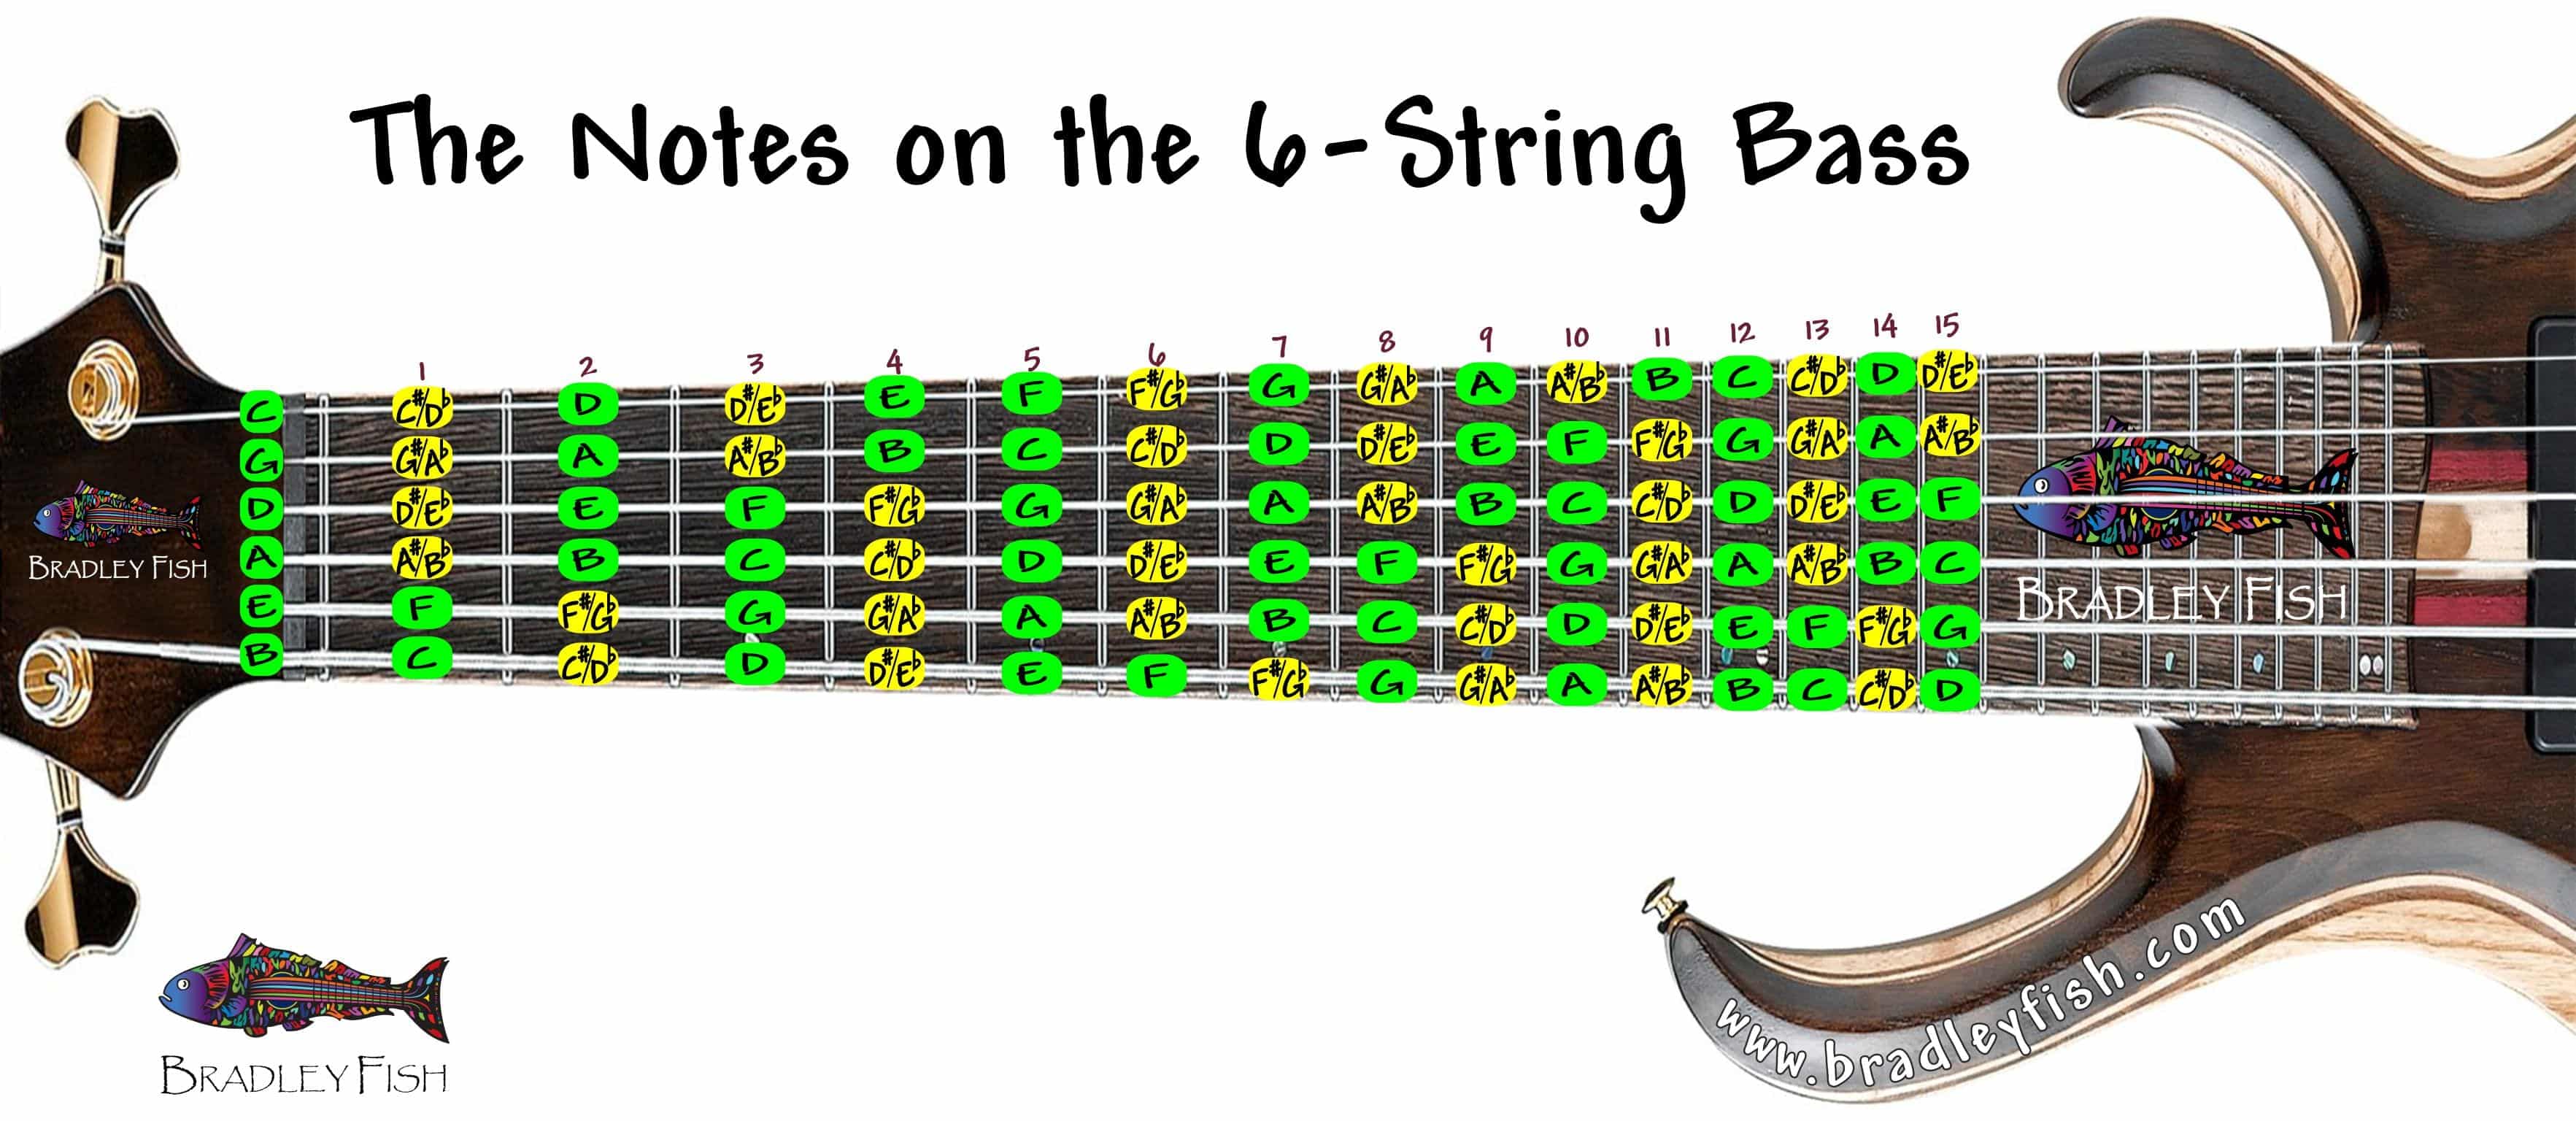 What are the notes on the 6-string bass – Bradley Fish